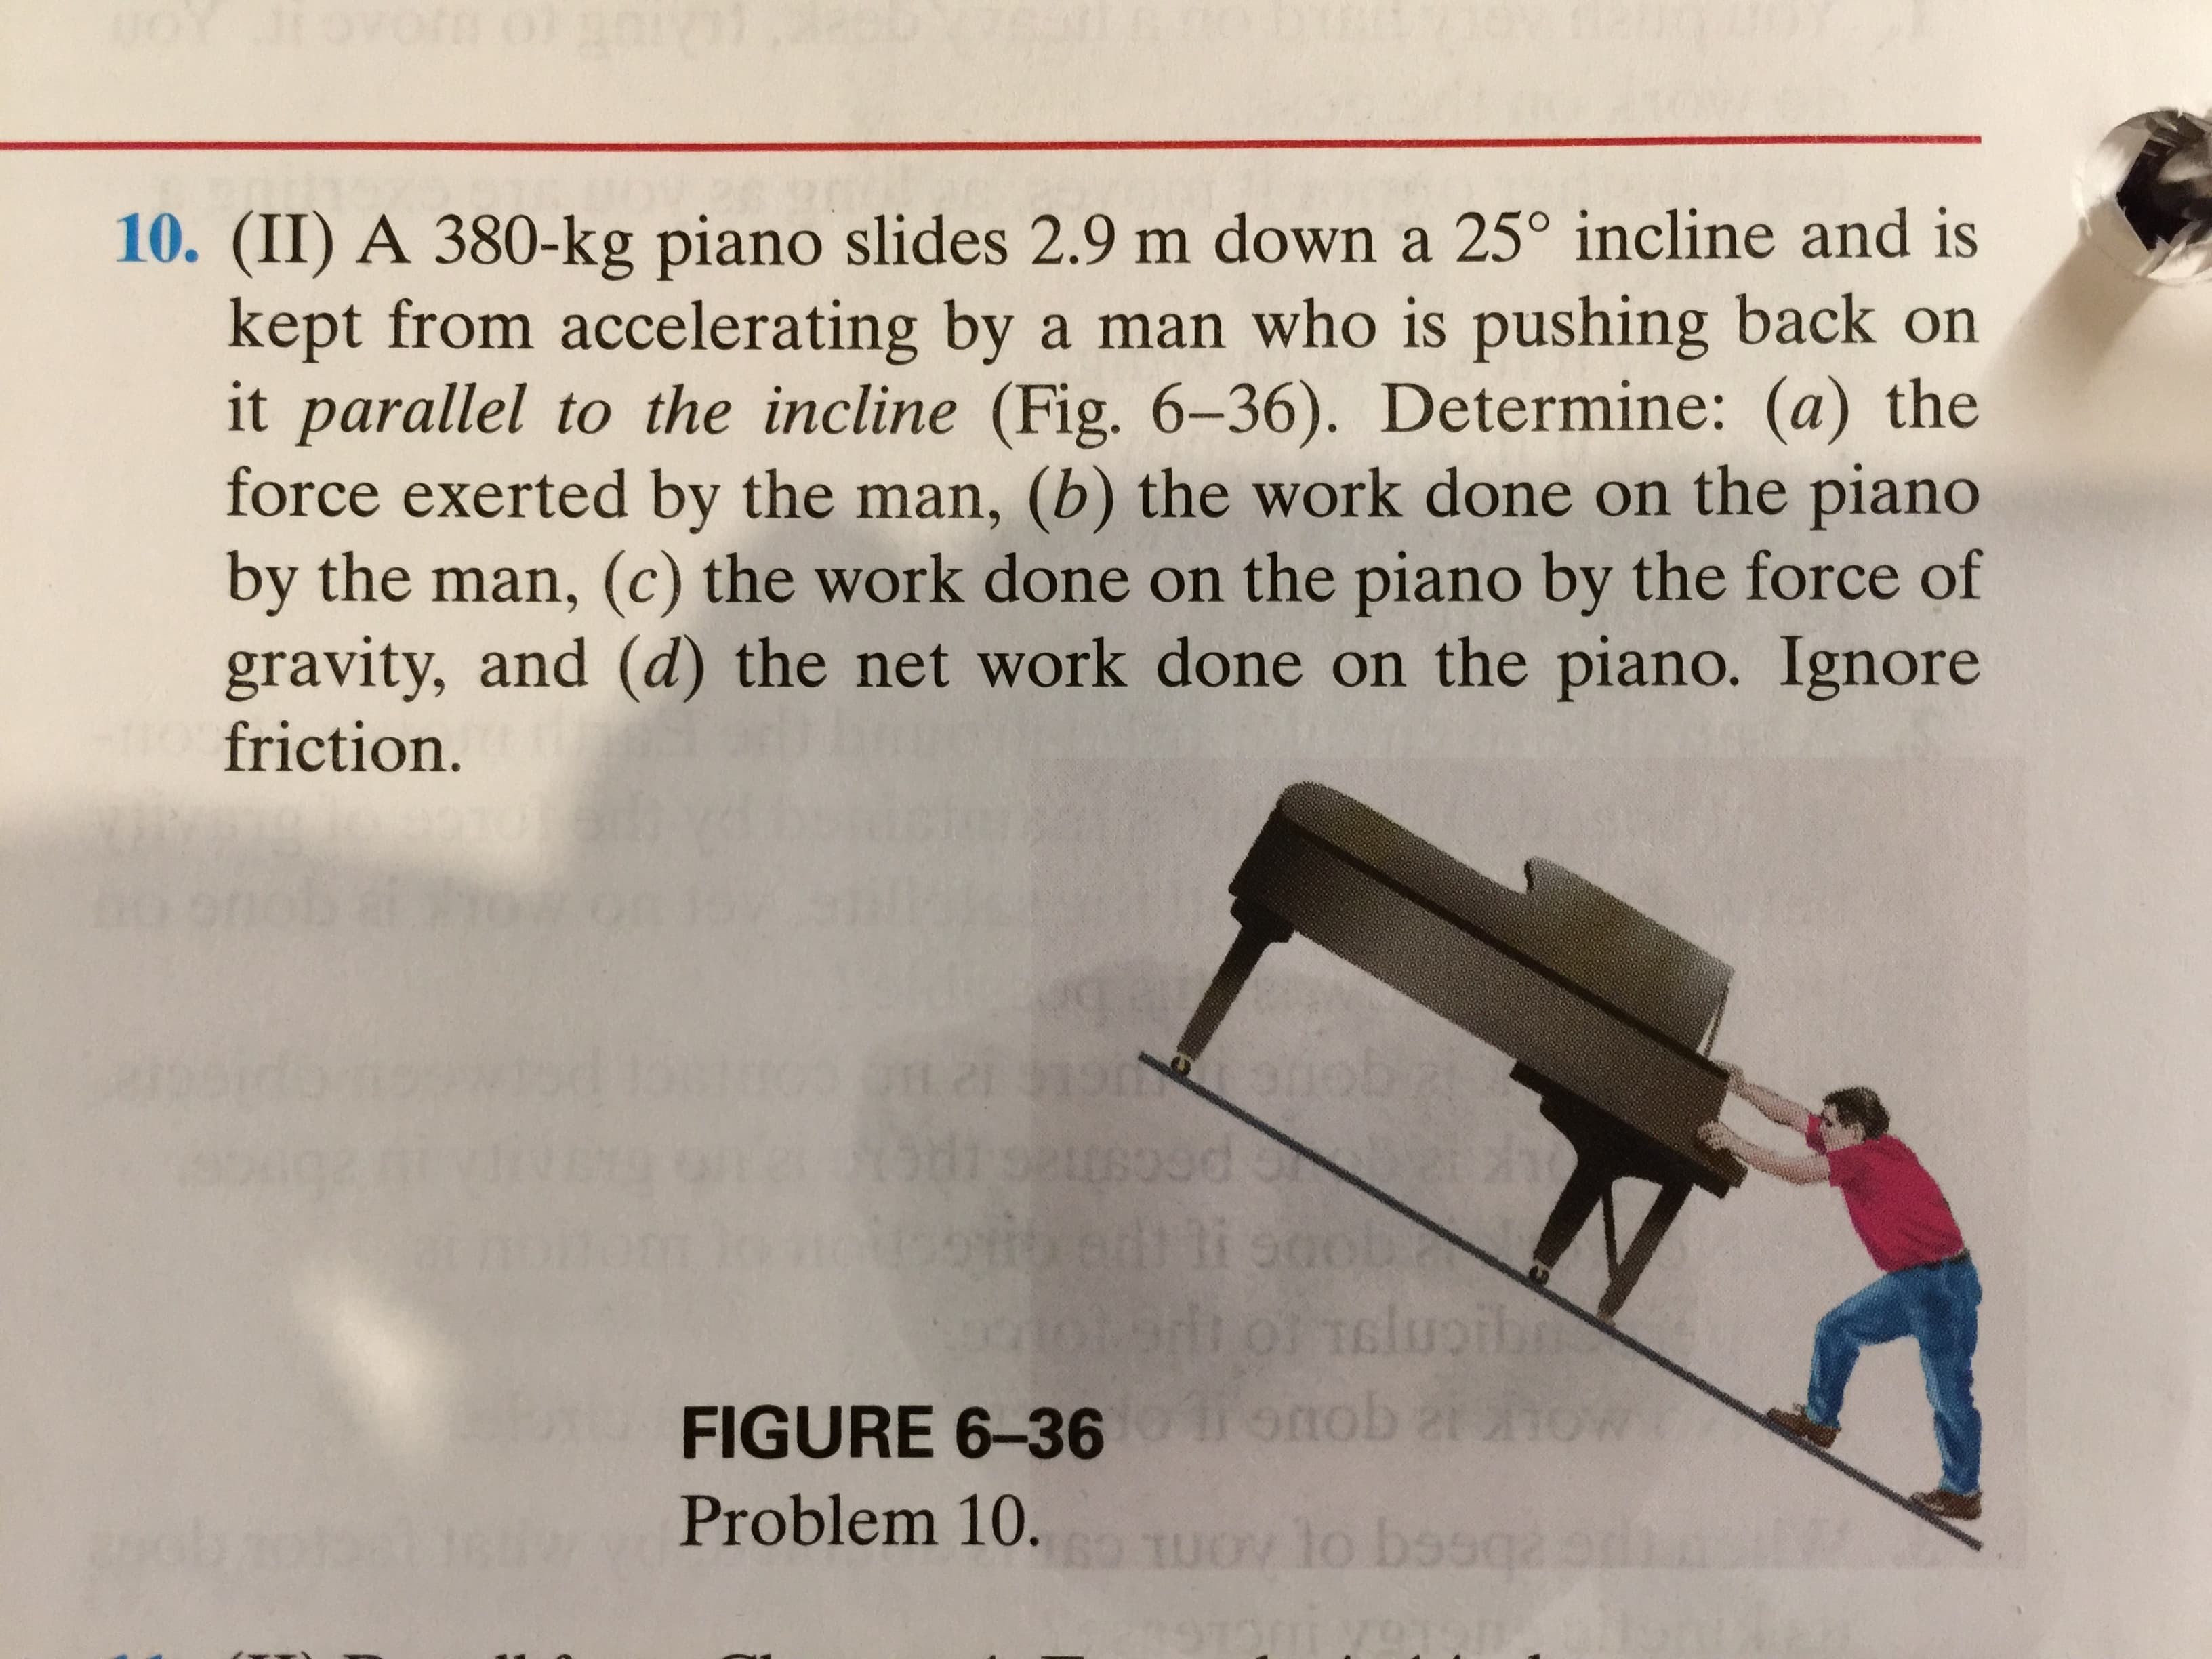 oY JEOVOrm0
10. (II) A 380-kg piano slides 2.9 m down a 25° incline and is
kept from accelerating by a man who is pushing back on
it parallel to the incline (Fig. 6-36). Determine: (a) the
force exerted by the man, (b) the work done on the piano
by the man, (c) the work done on the piano by the force of
gravity, and (d) the net work done on the piano. Ignore
friction.
atiob
0d ongi
5006
luc
omob
an
FIGURE 6-36
Problem 10.
UO to bssqa
23
TG HOA
